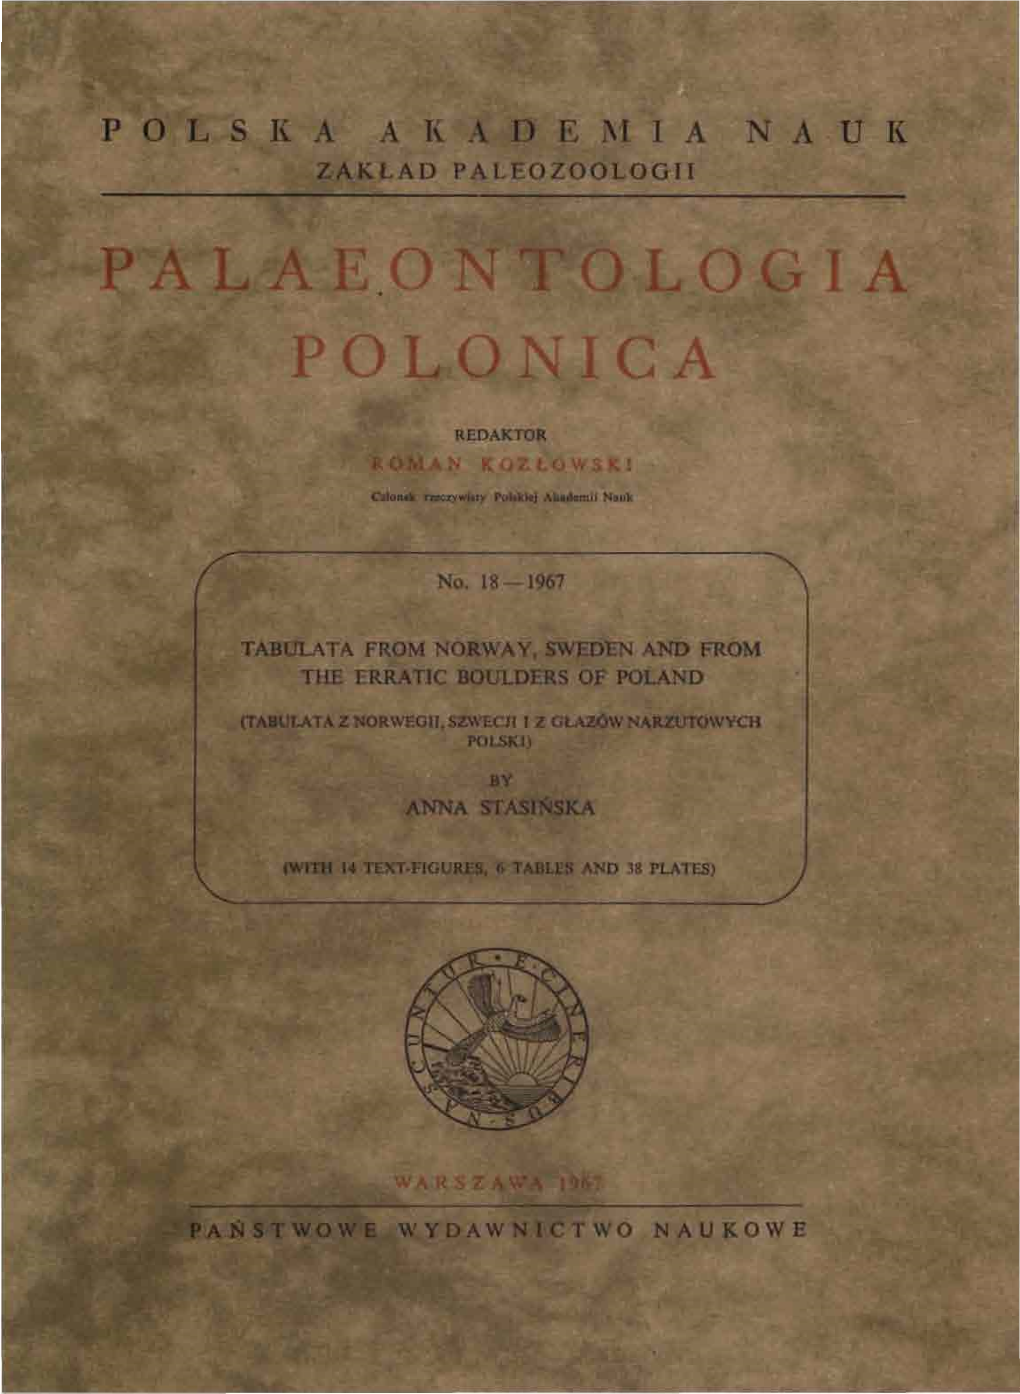 Tabulata from Norway, Sweden and from ... -.: Palaeontologia Polonica